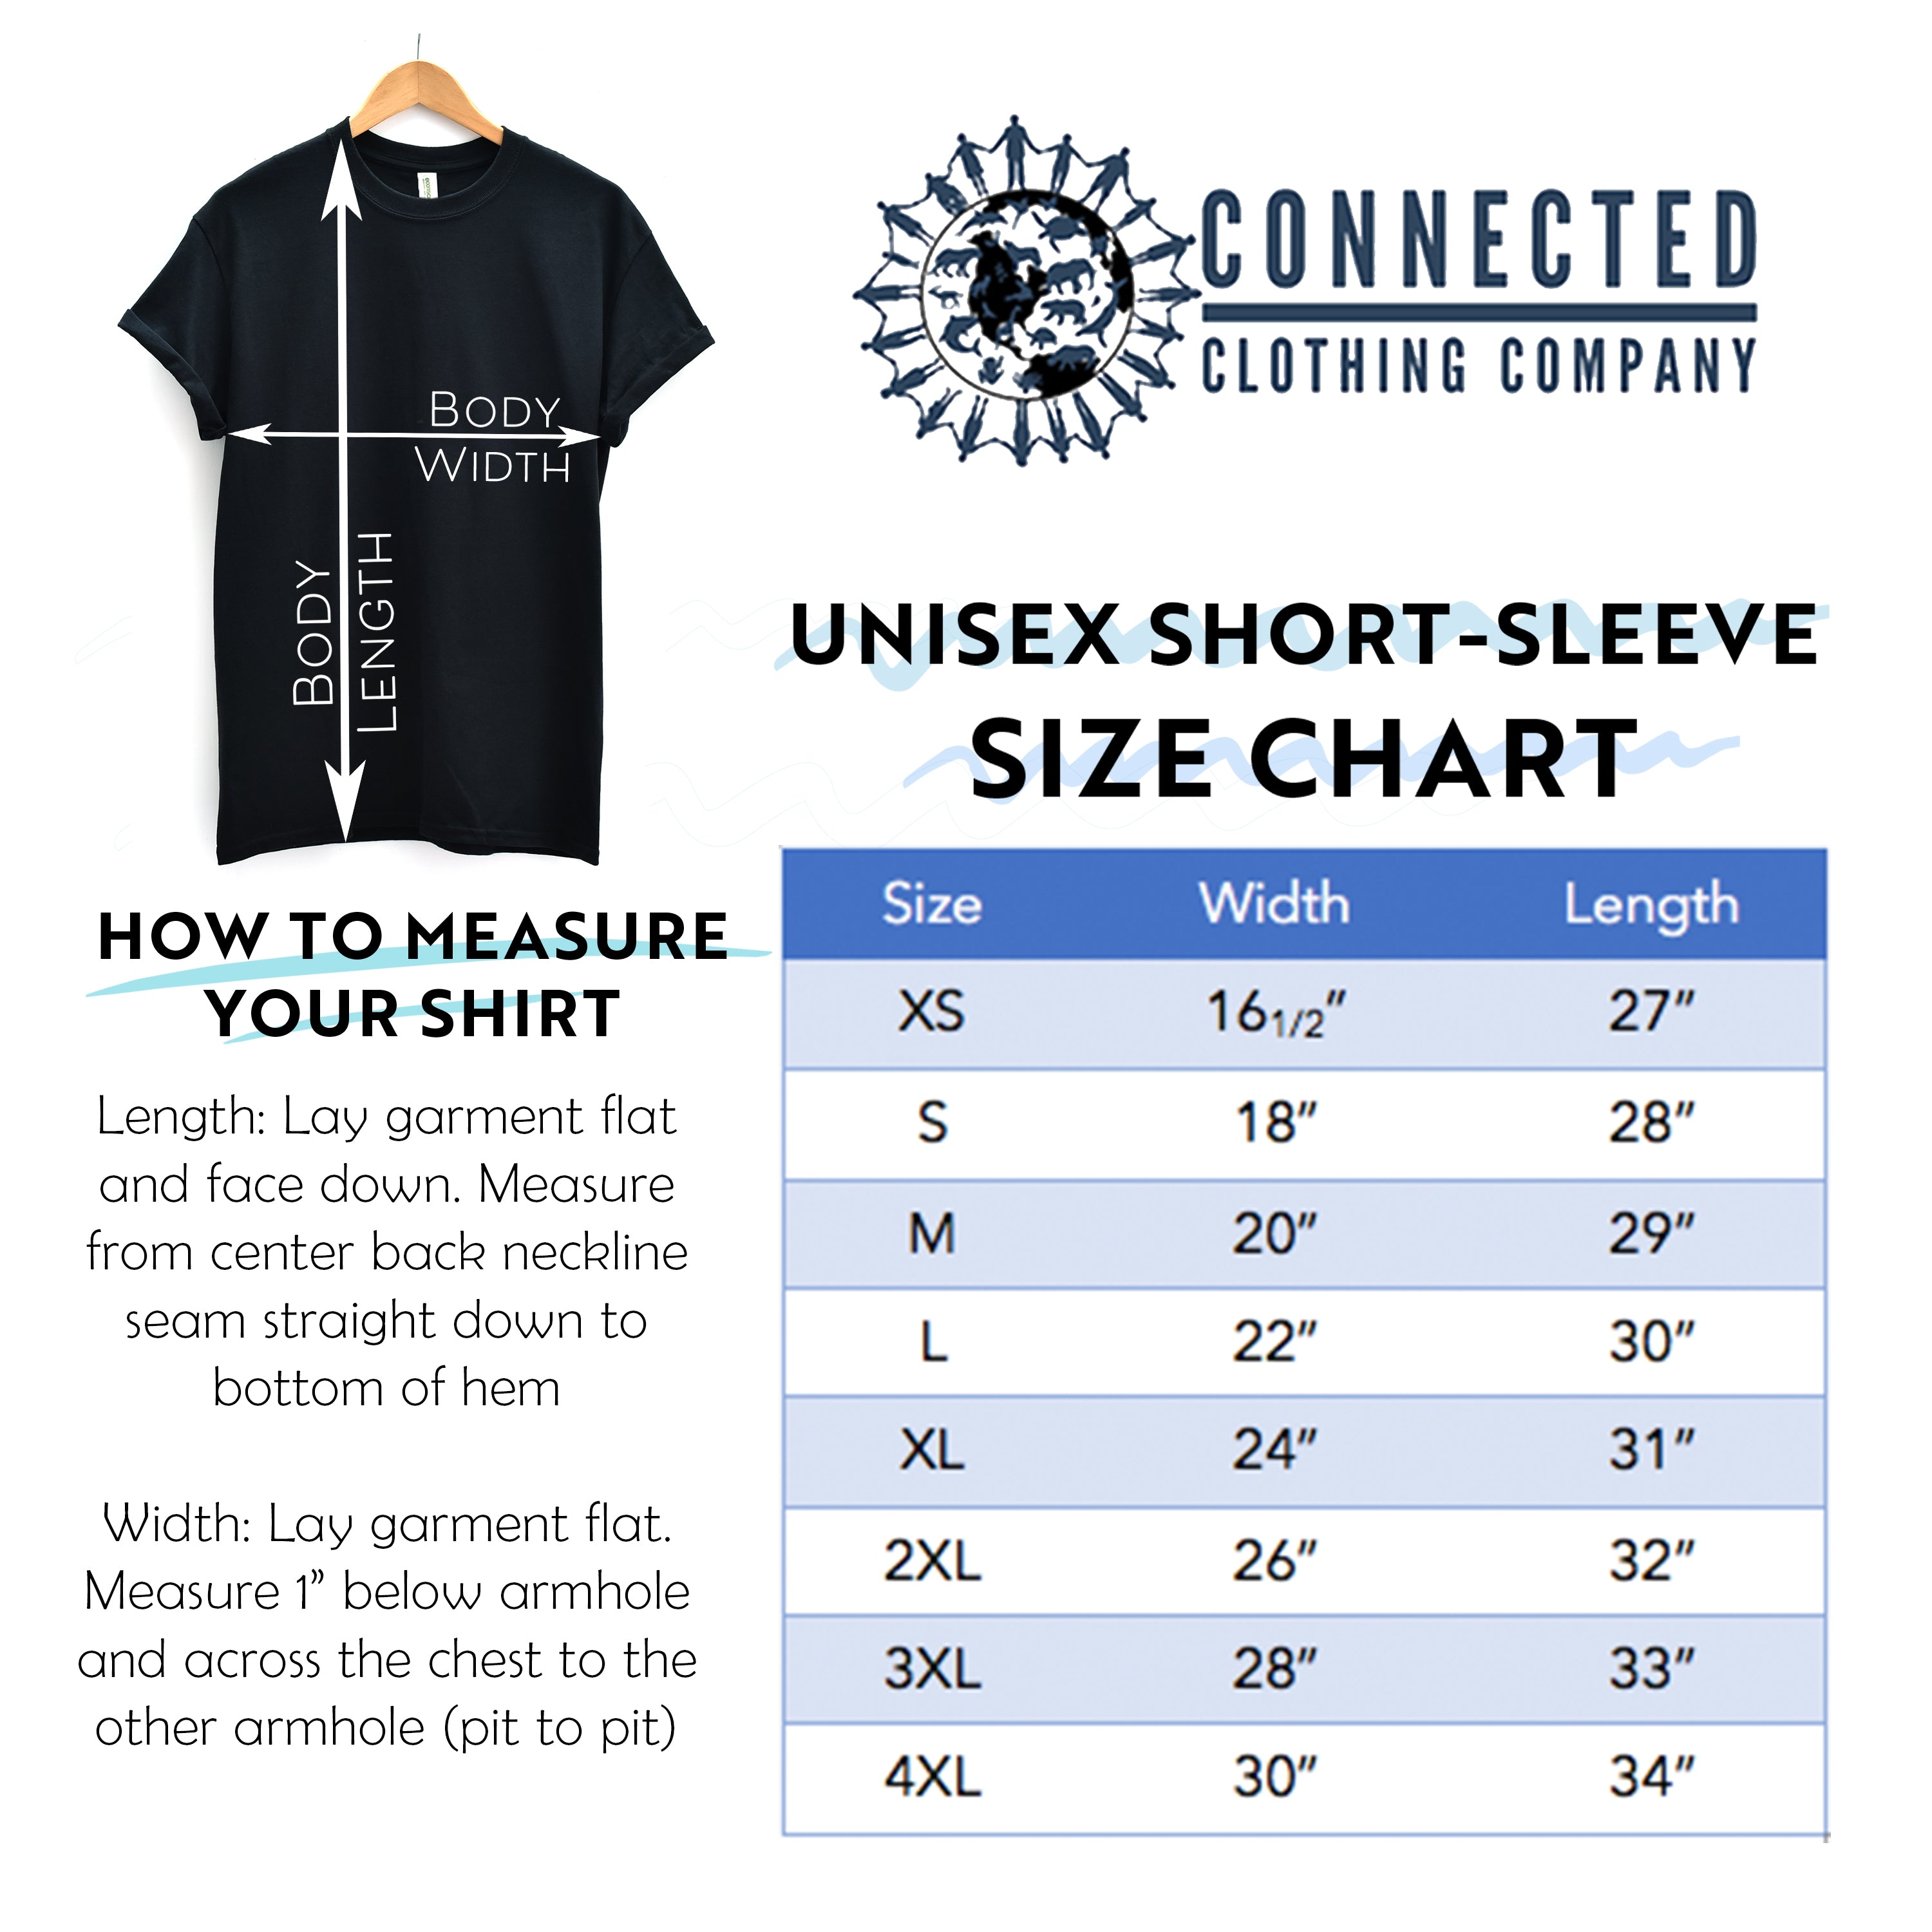 Unisex Short-Sleeve Tee Size Chart - chinesemandaringarden - Ethically and Sustainably Made - 10% donated to Mission Blue ocean conservation